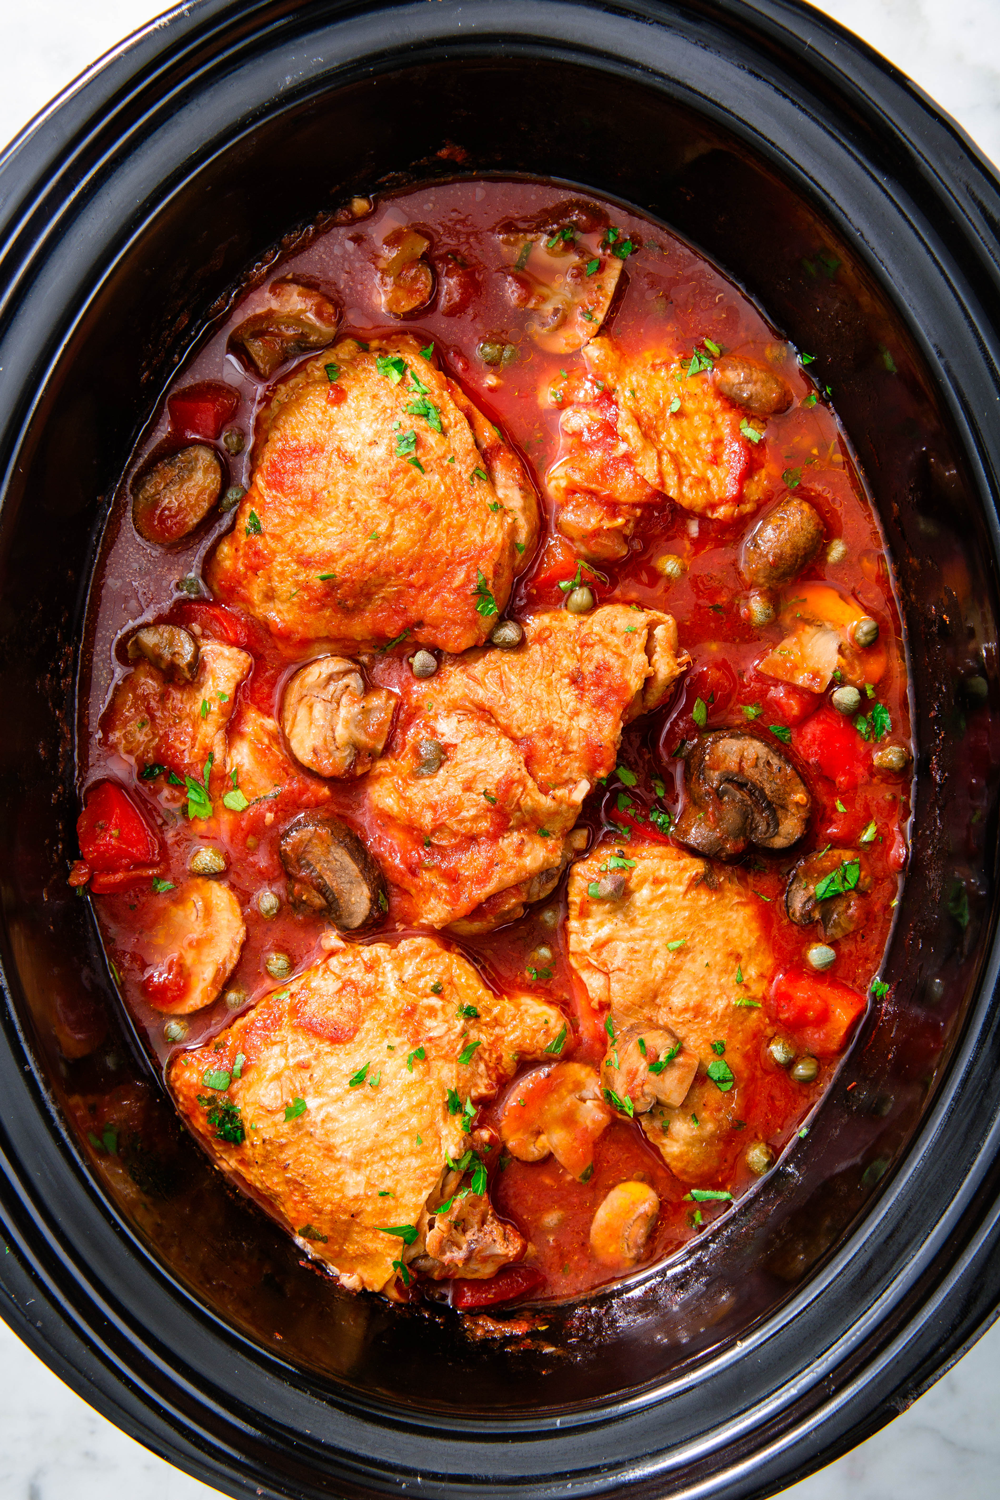 https://hips.hearstapps.com/hmg-prod/images/slo-cooker-chicken-cacciatore-vertical-1536771734.png